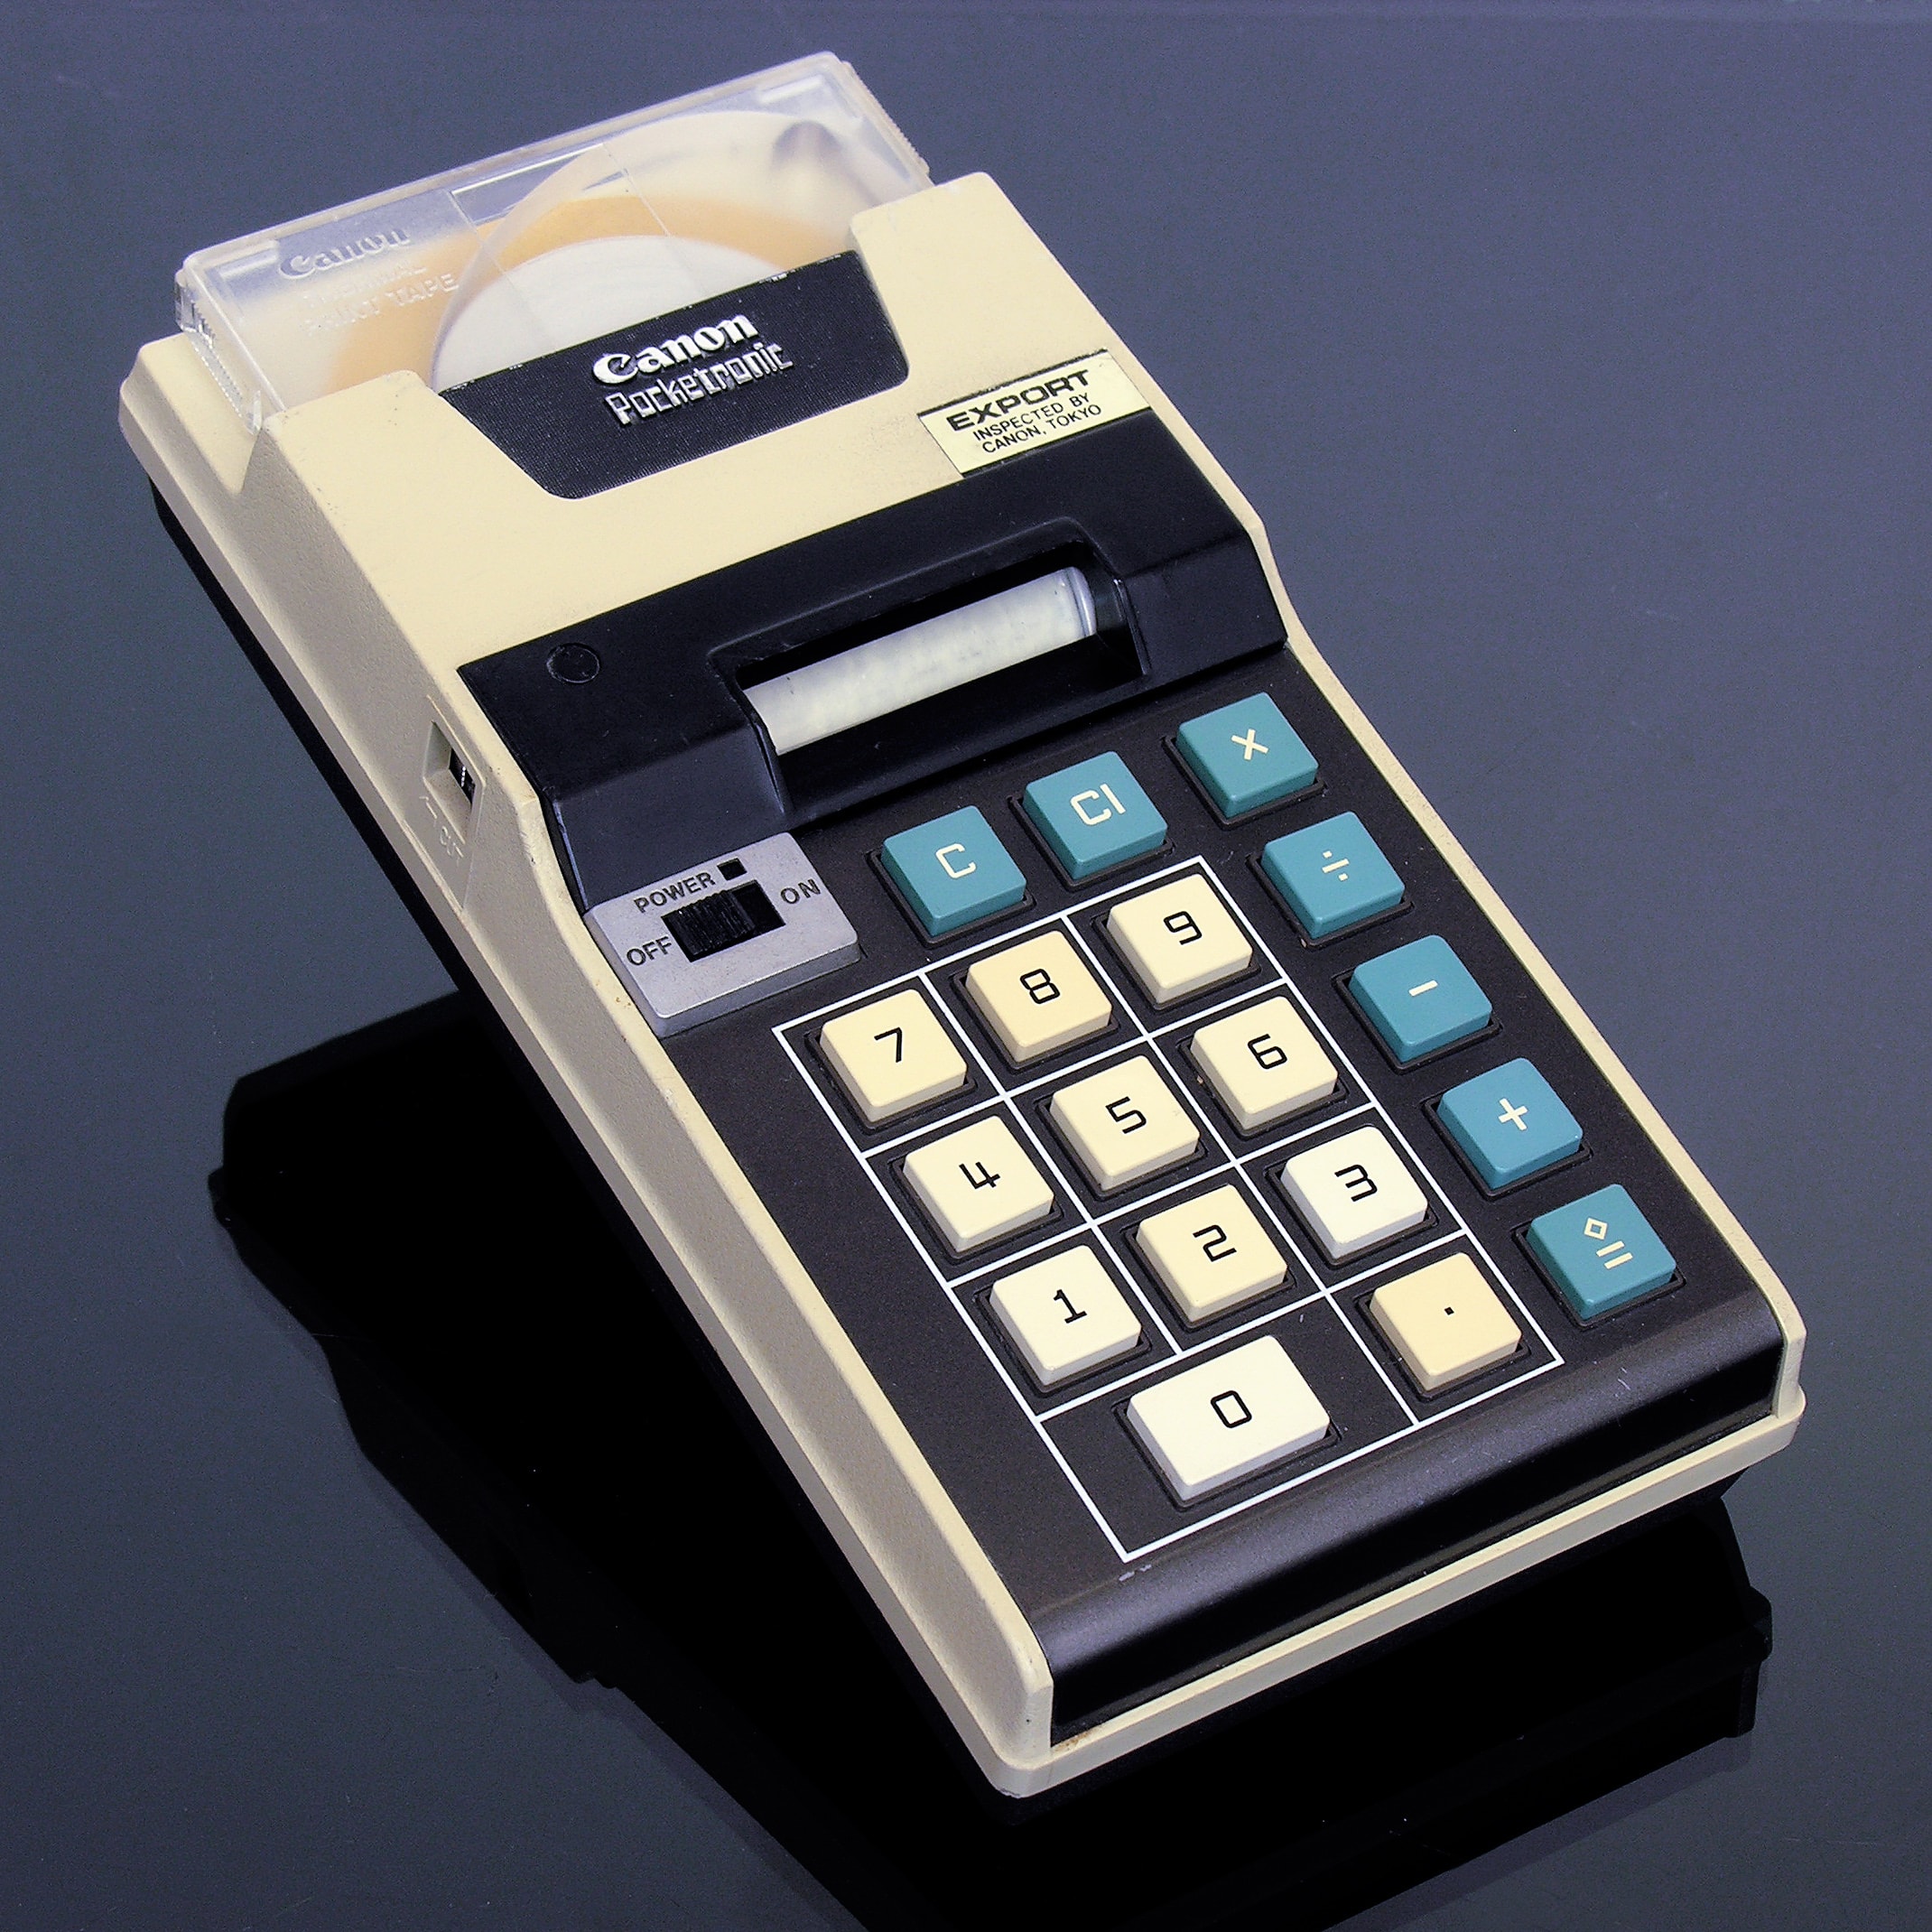 The Canon Pocketronic, a beige and black printing calculator based on a Texas Instruments prototype.